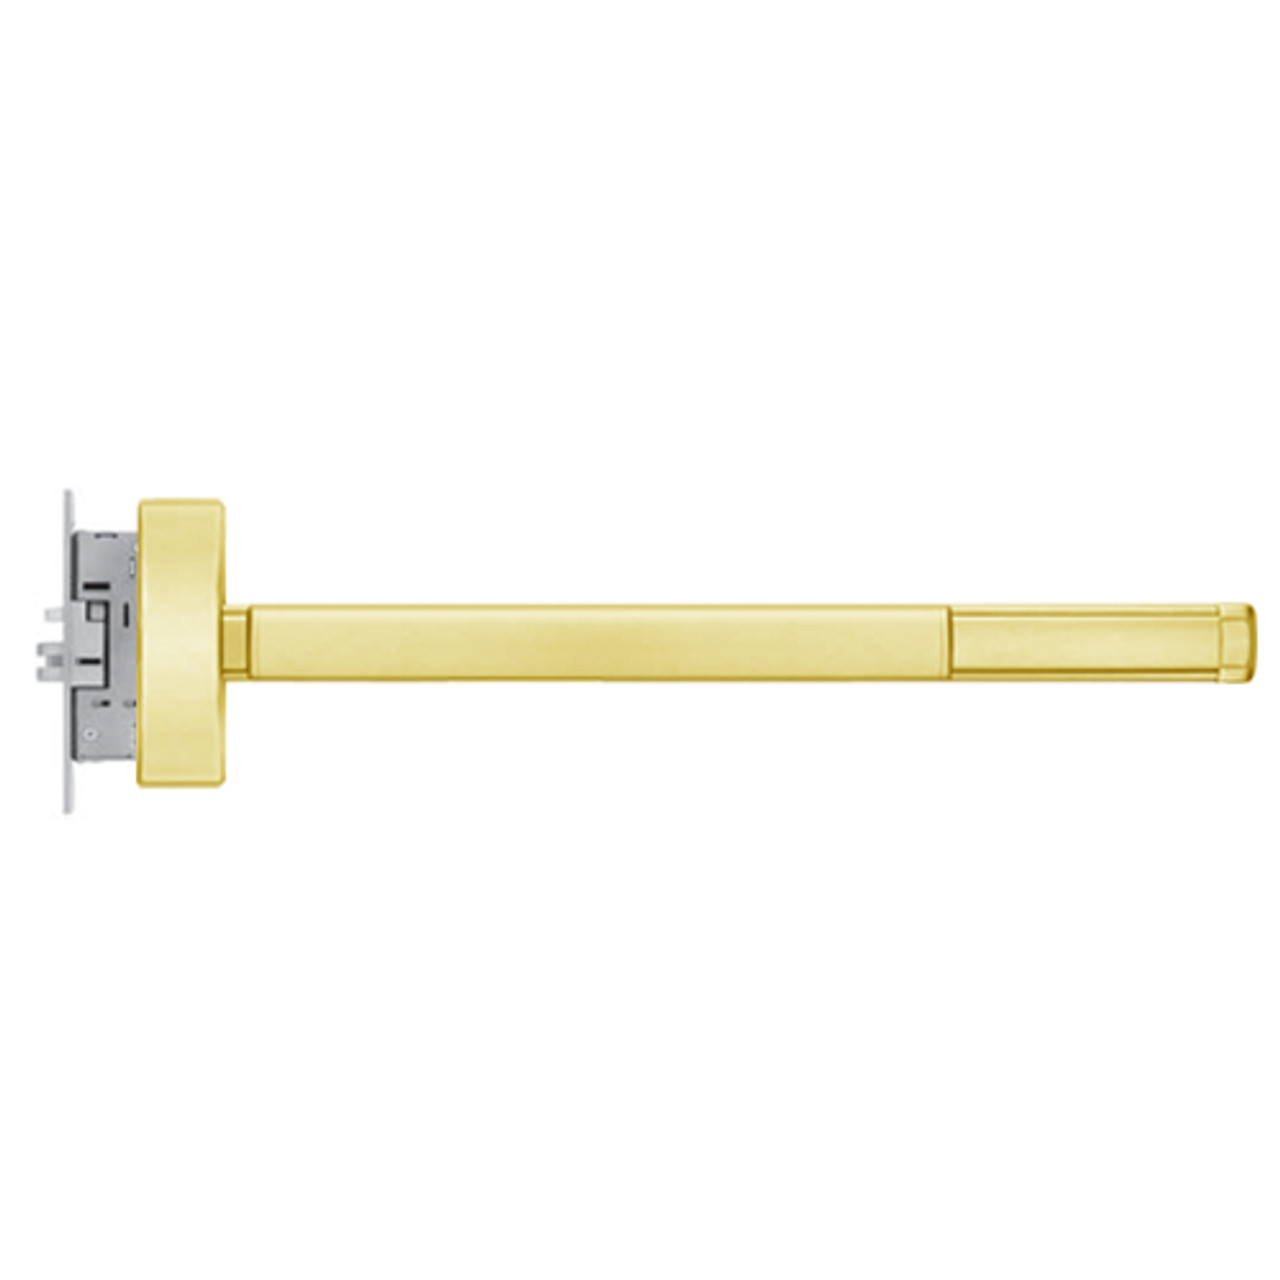 MLR2302-LHR-605-36 PHI 2300 Series Apex Mortise Exit Device with Motorized Latch Retraction Prepped for Dummy Trim in Bright Brass Finish